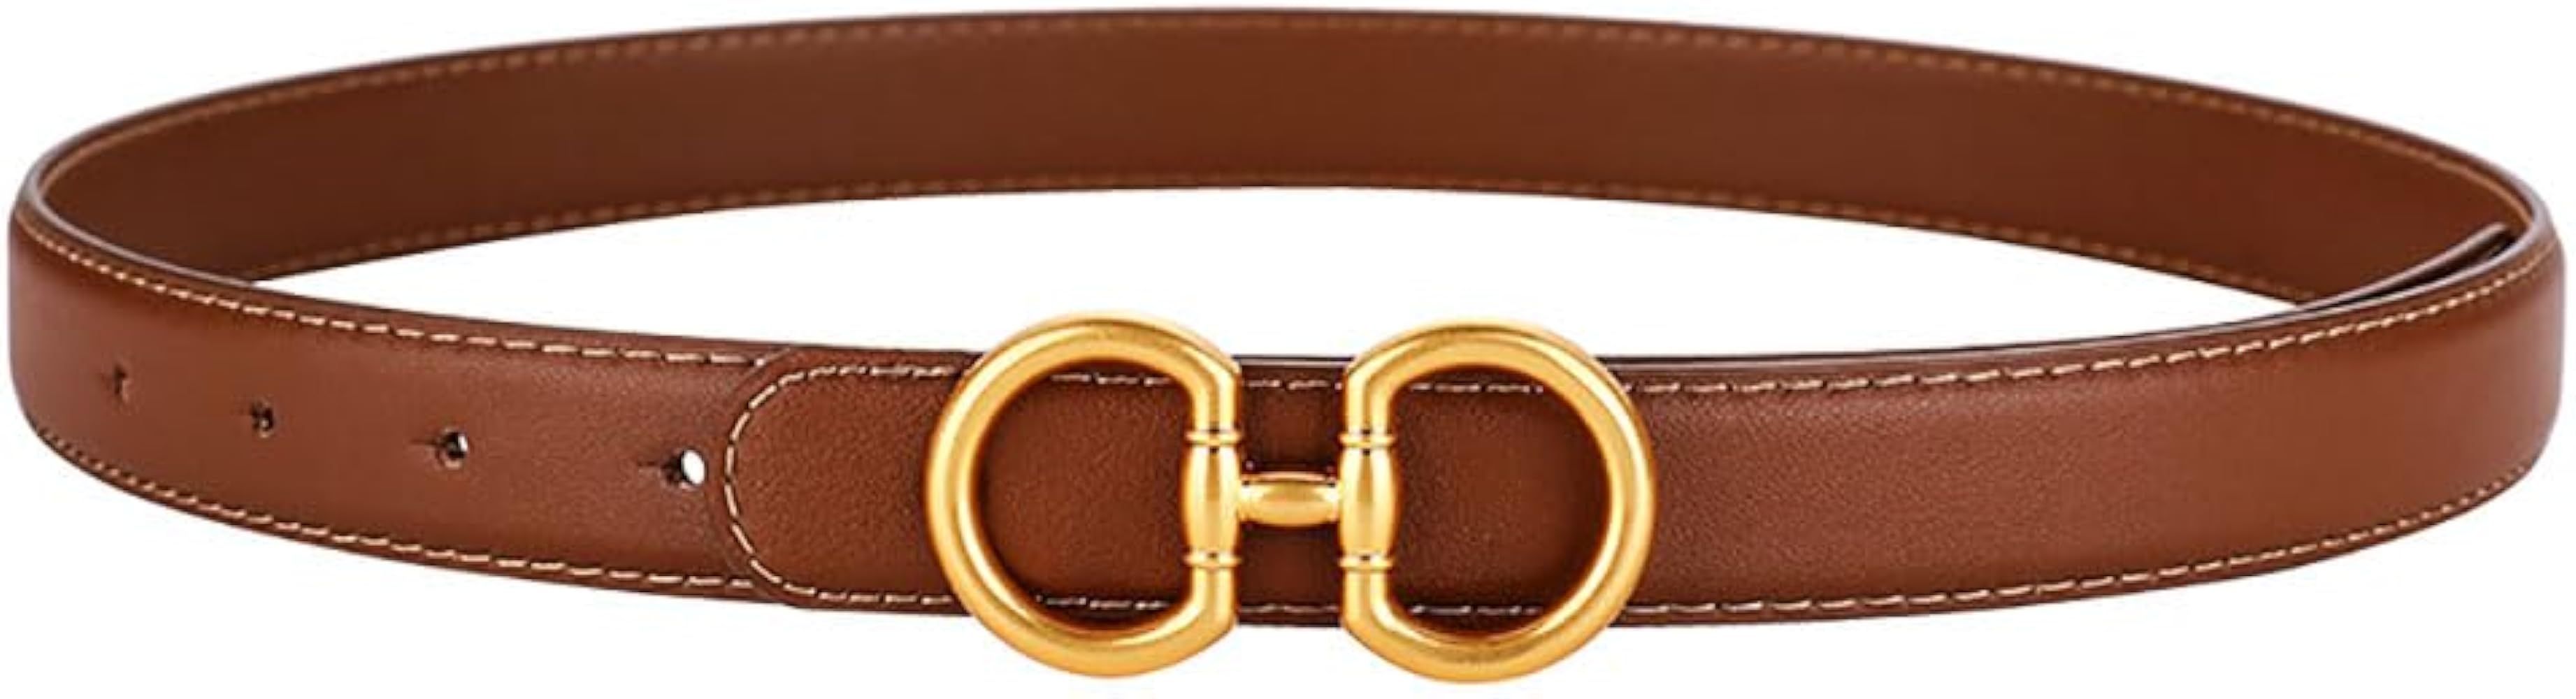 FOMCORT Women Leather Belt for Dresses, Classic Buckle Design Jeans Belt for Pants in Gold Buckle... | Amazon (US)